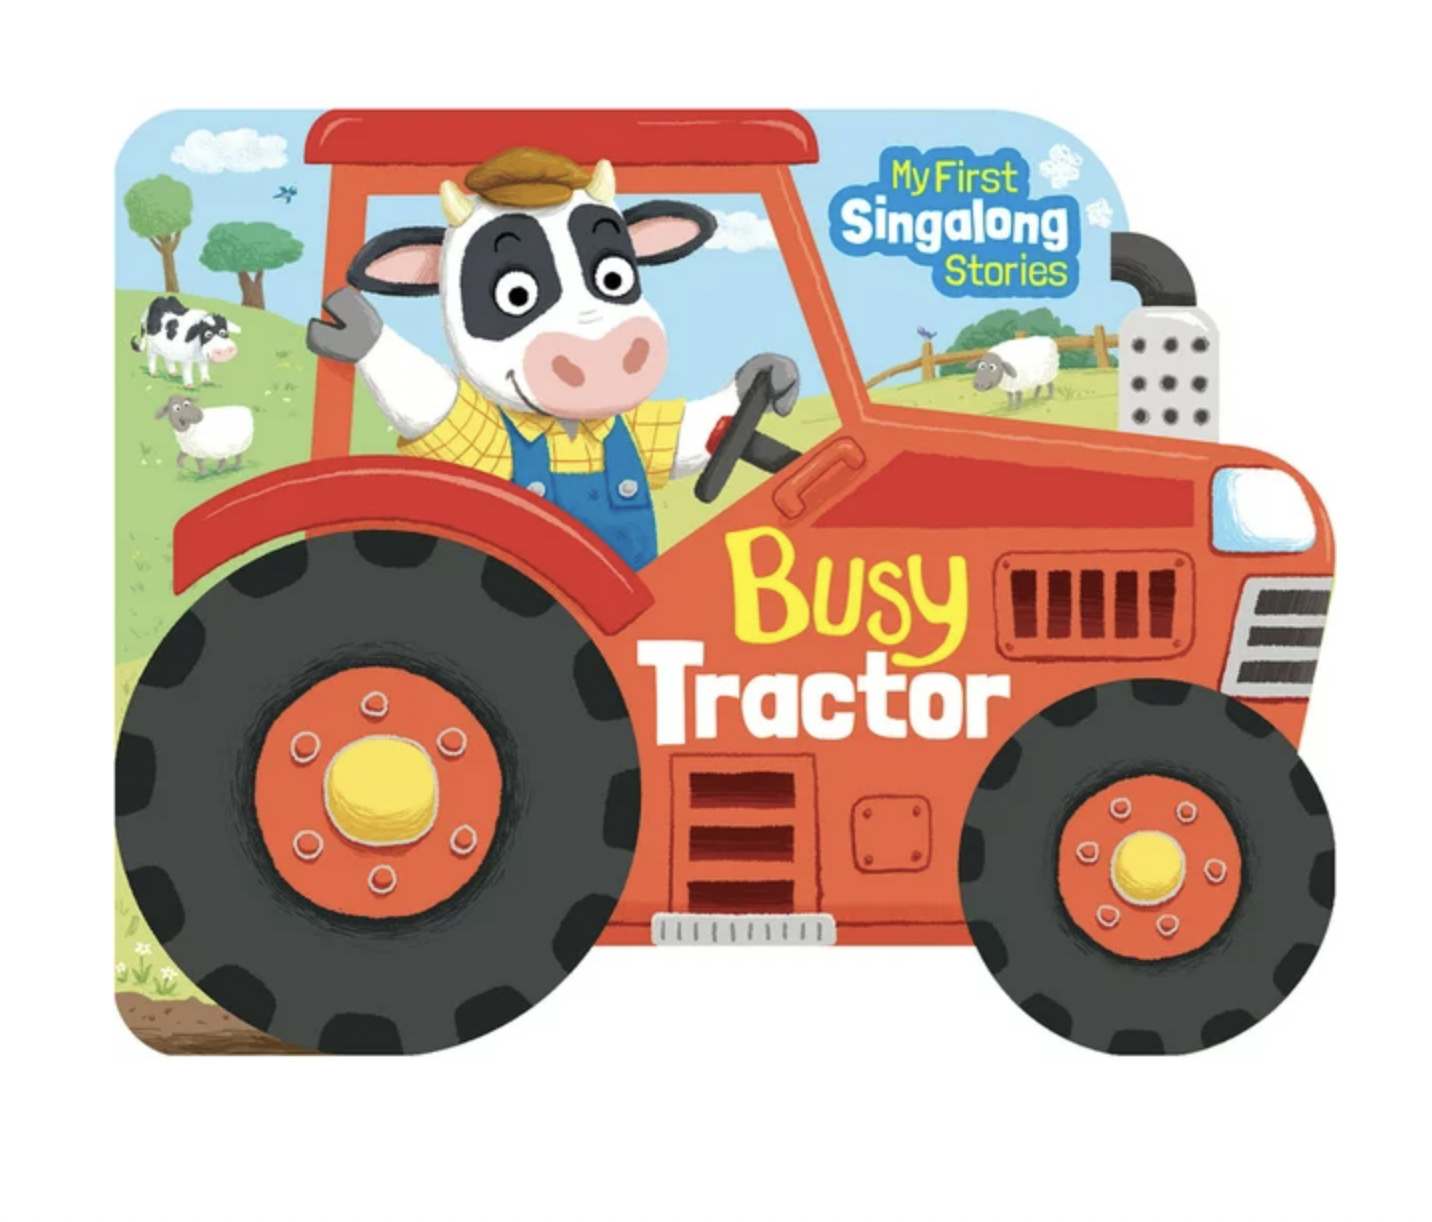 Busy Tractor Singalong Book